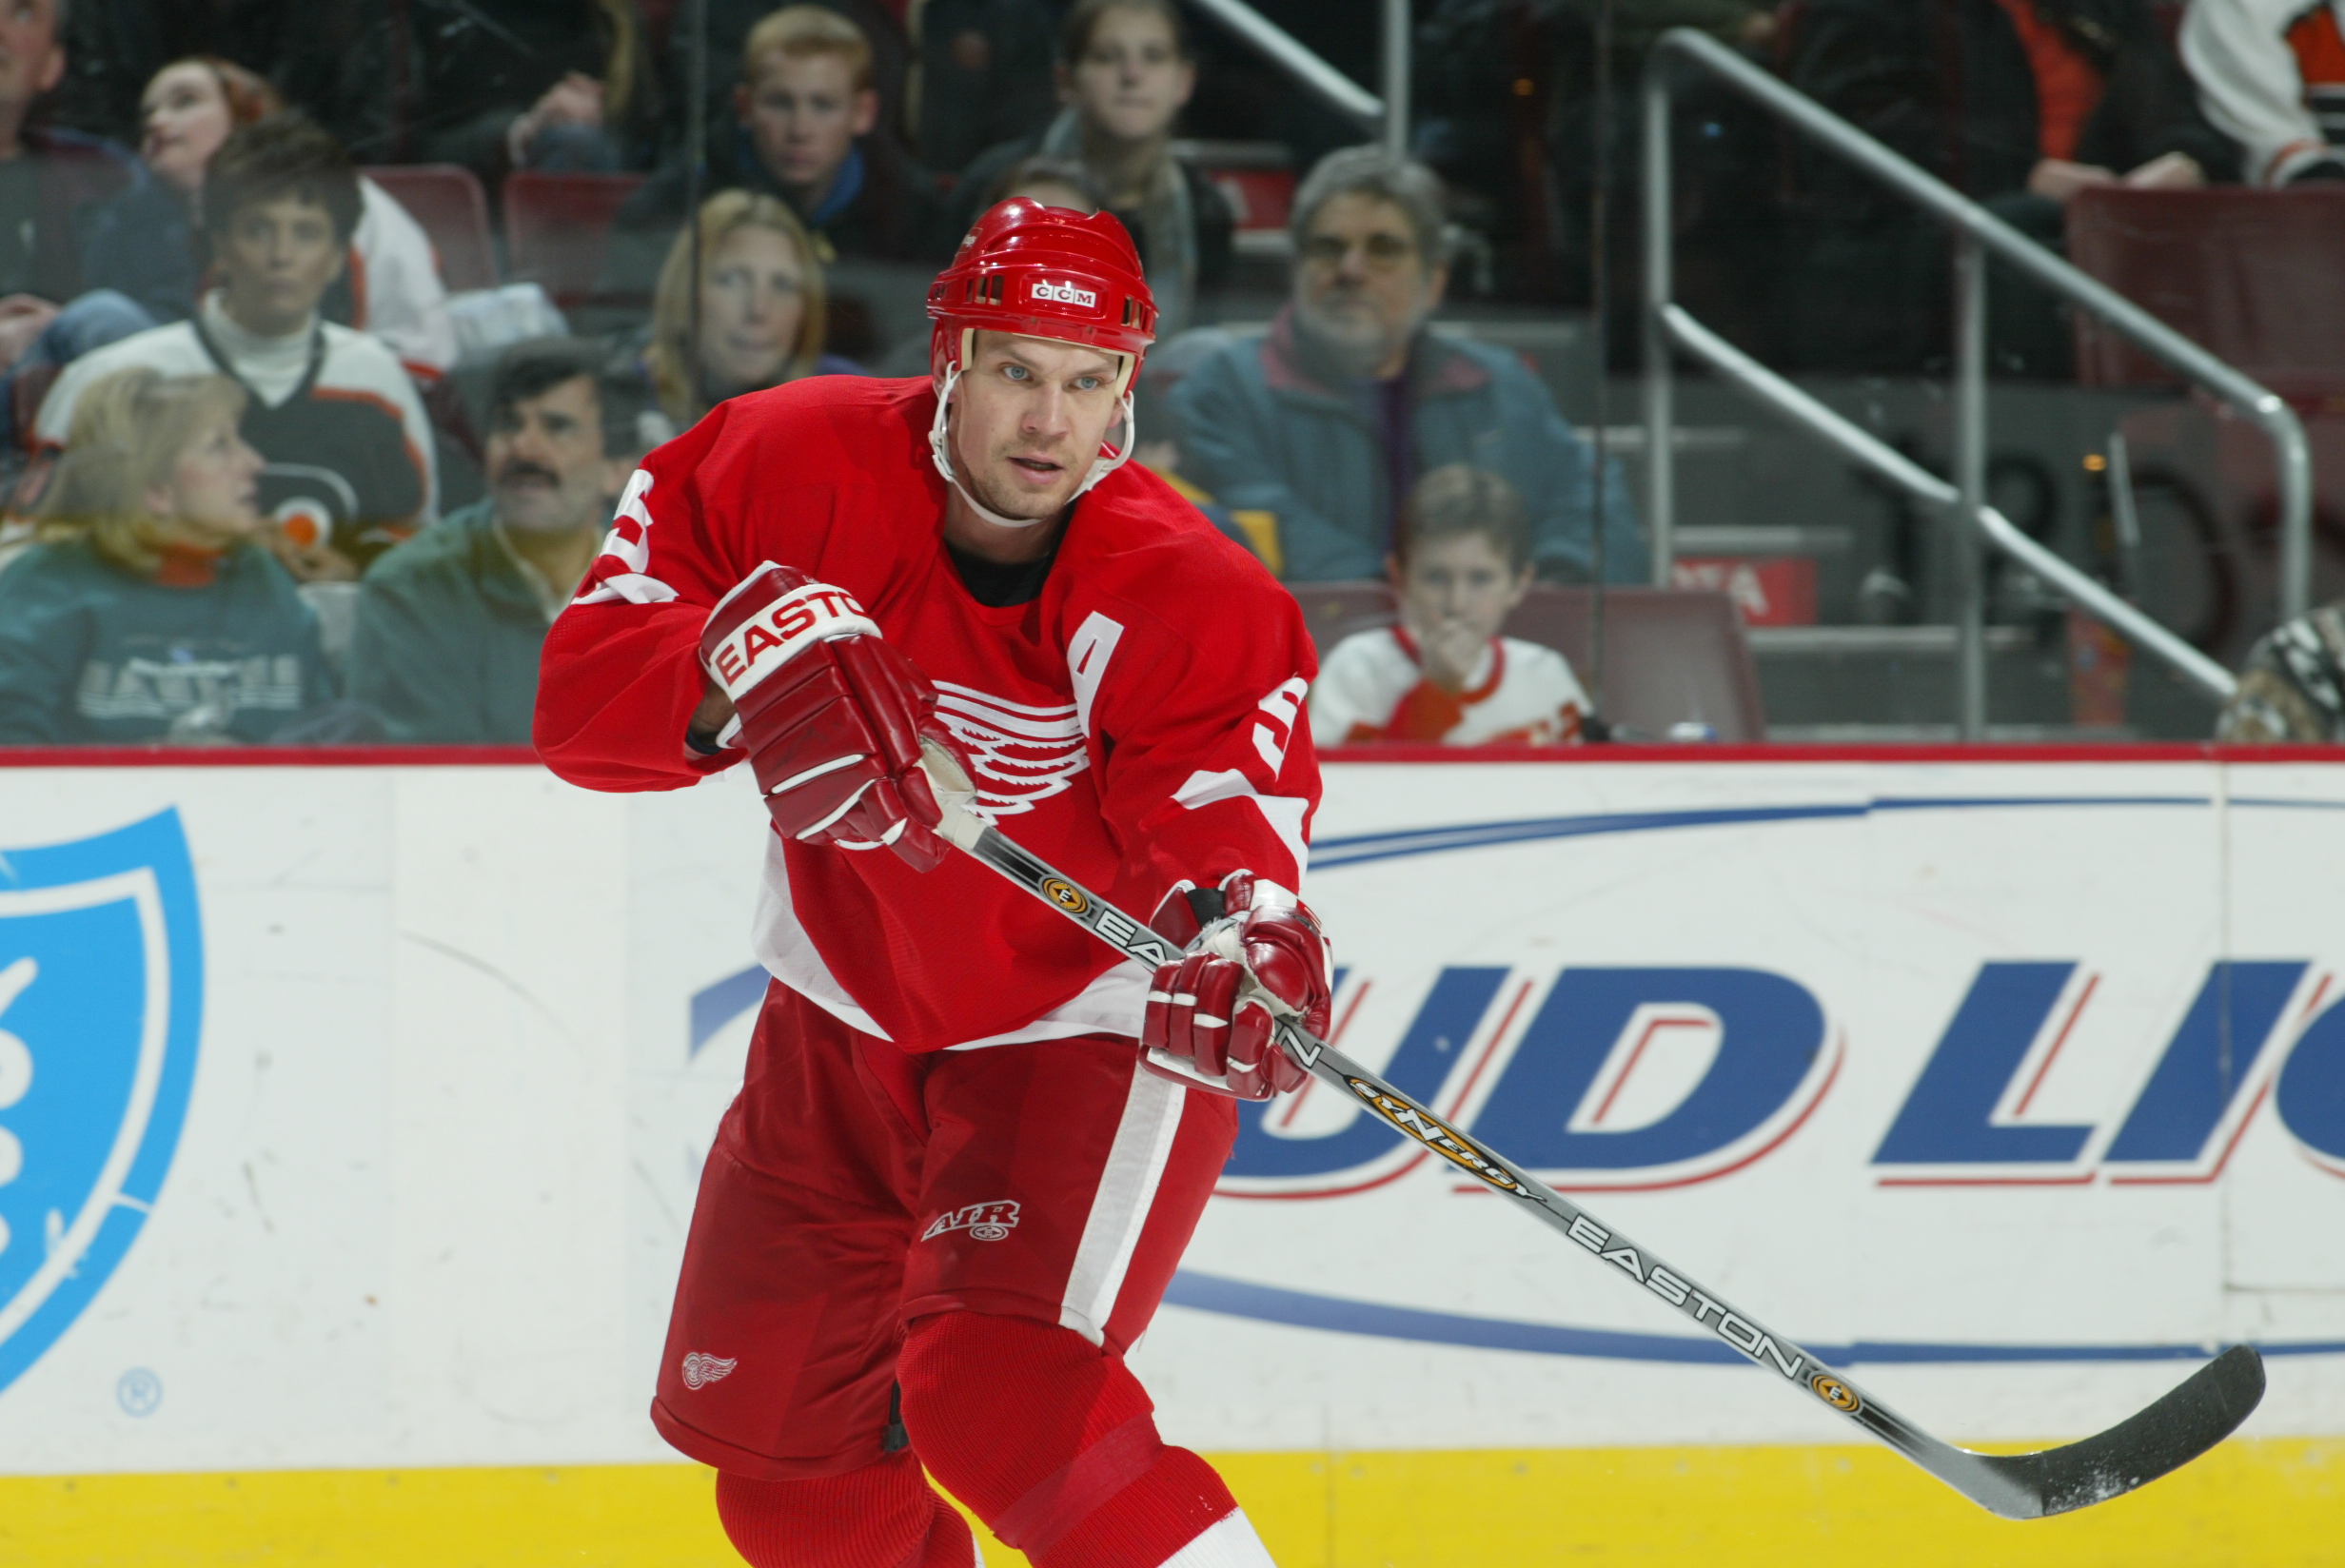 Top 5 Nicklas Lidstrom Moments  Lidstrom Named Greatest Swedish Player of  All-Time 